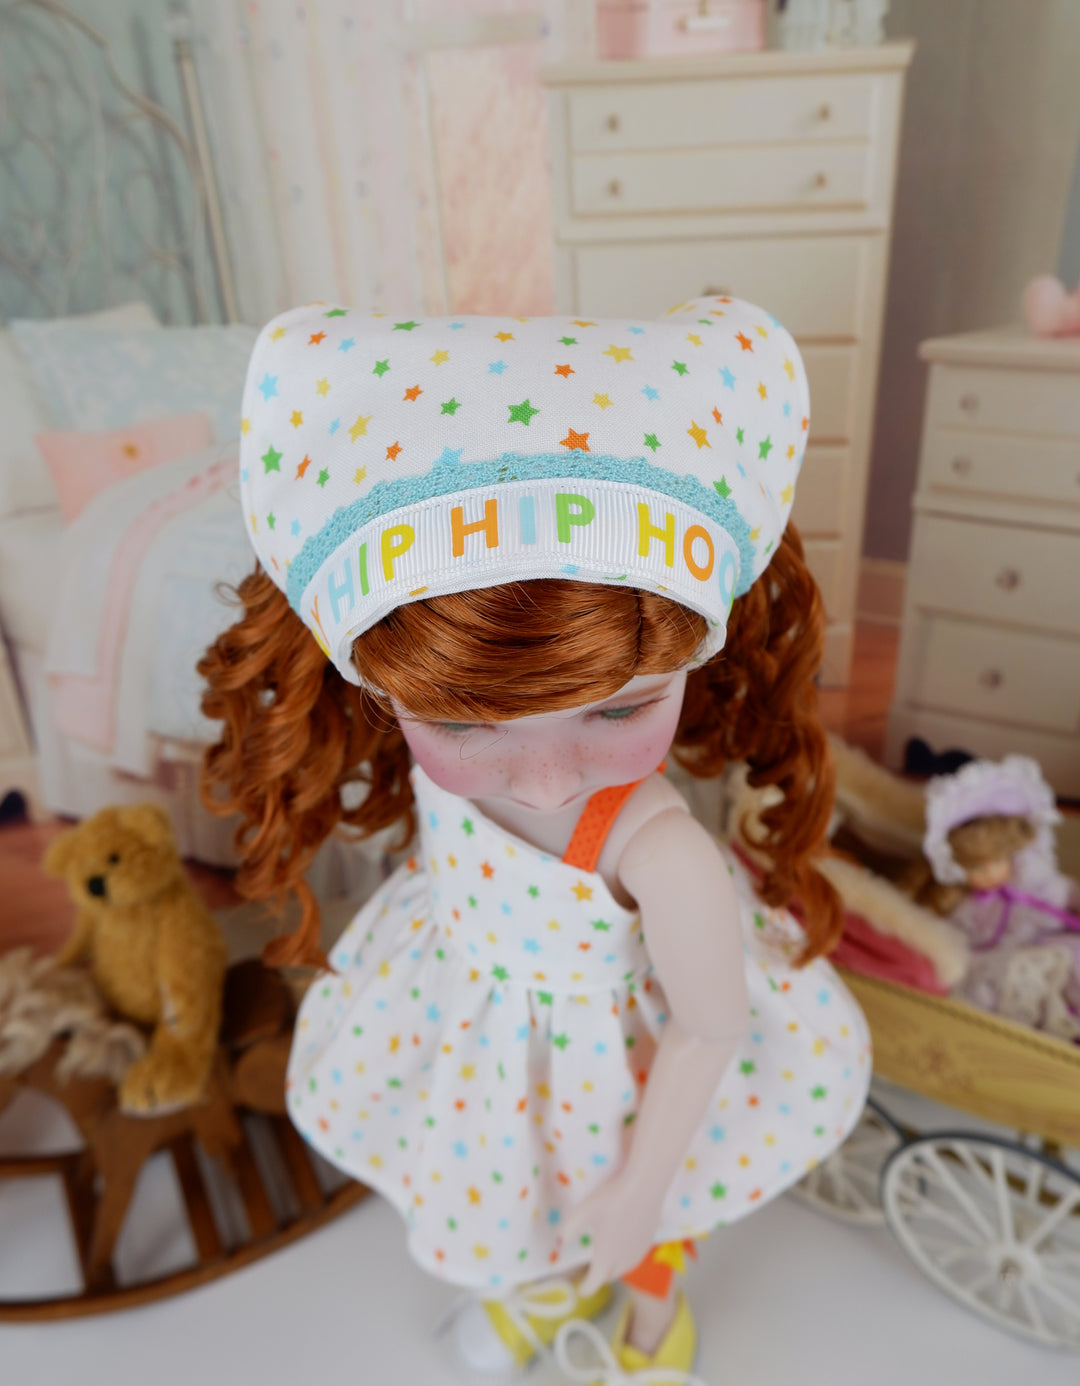 Hip Hip Hooray - top & capris with shoes for Ruby Red Fashion Friends doll